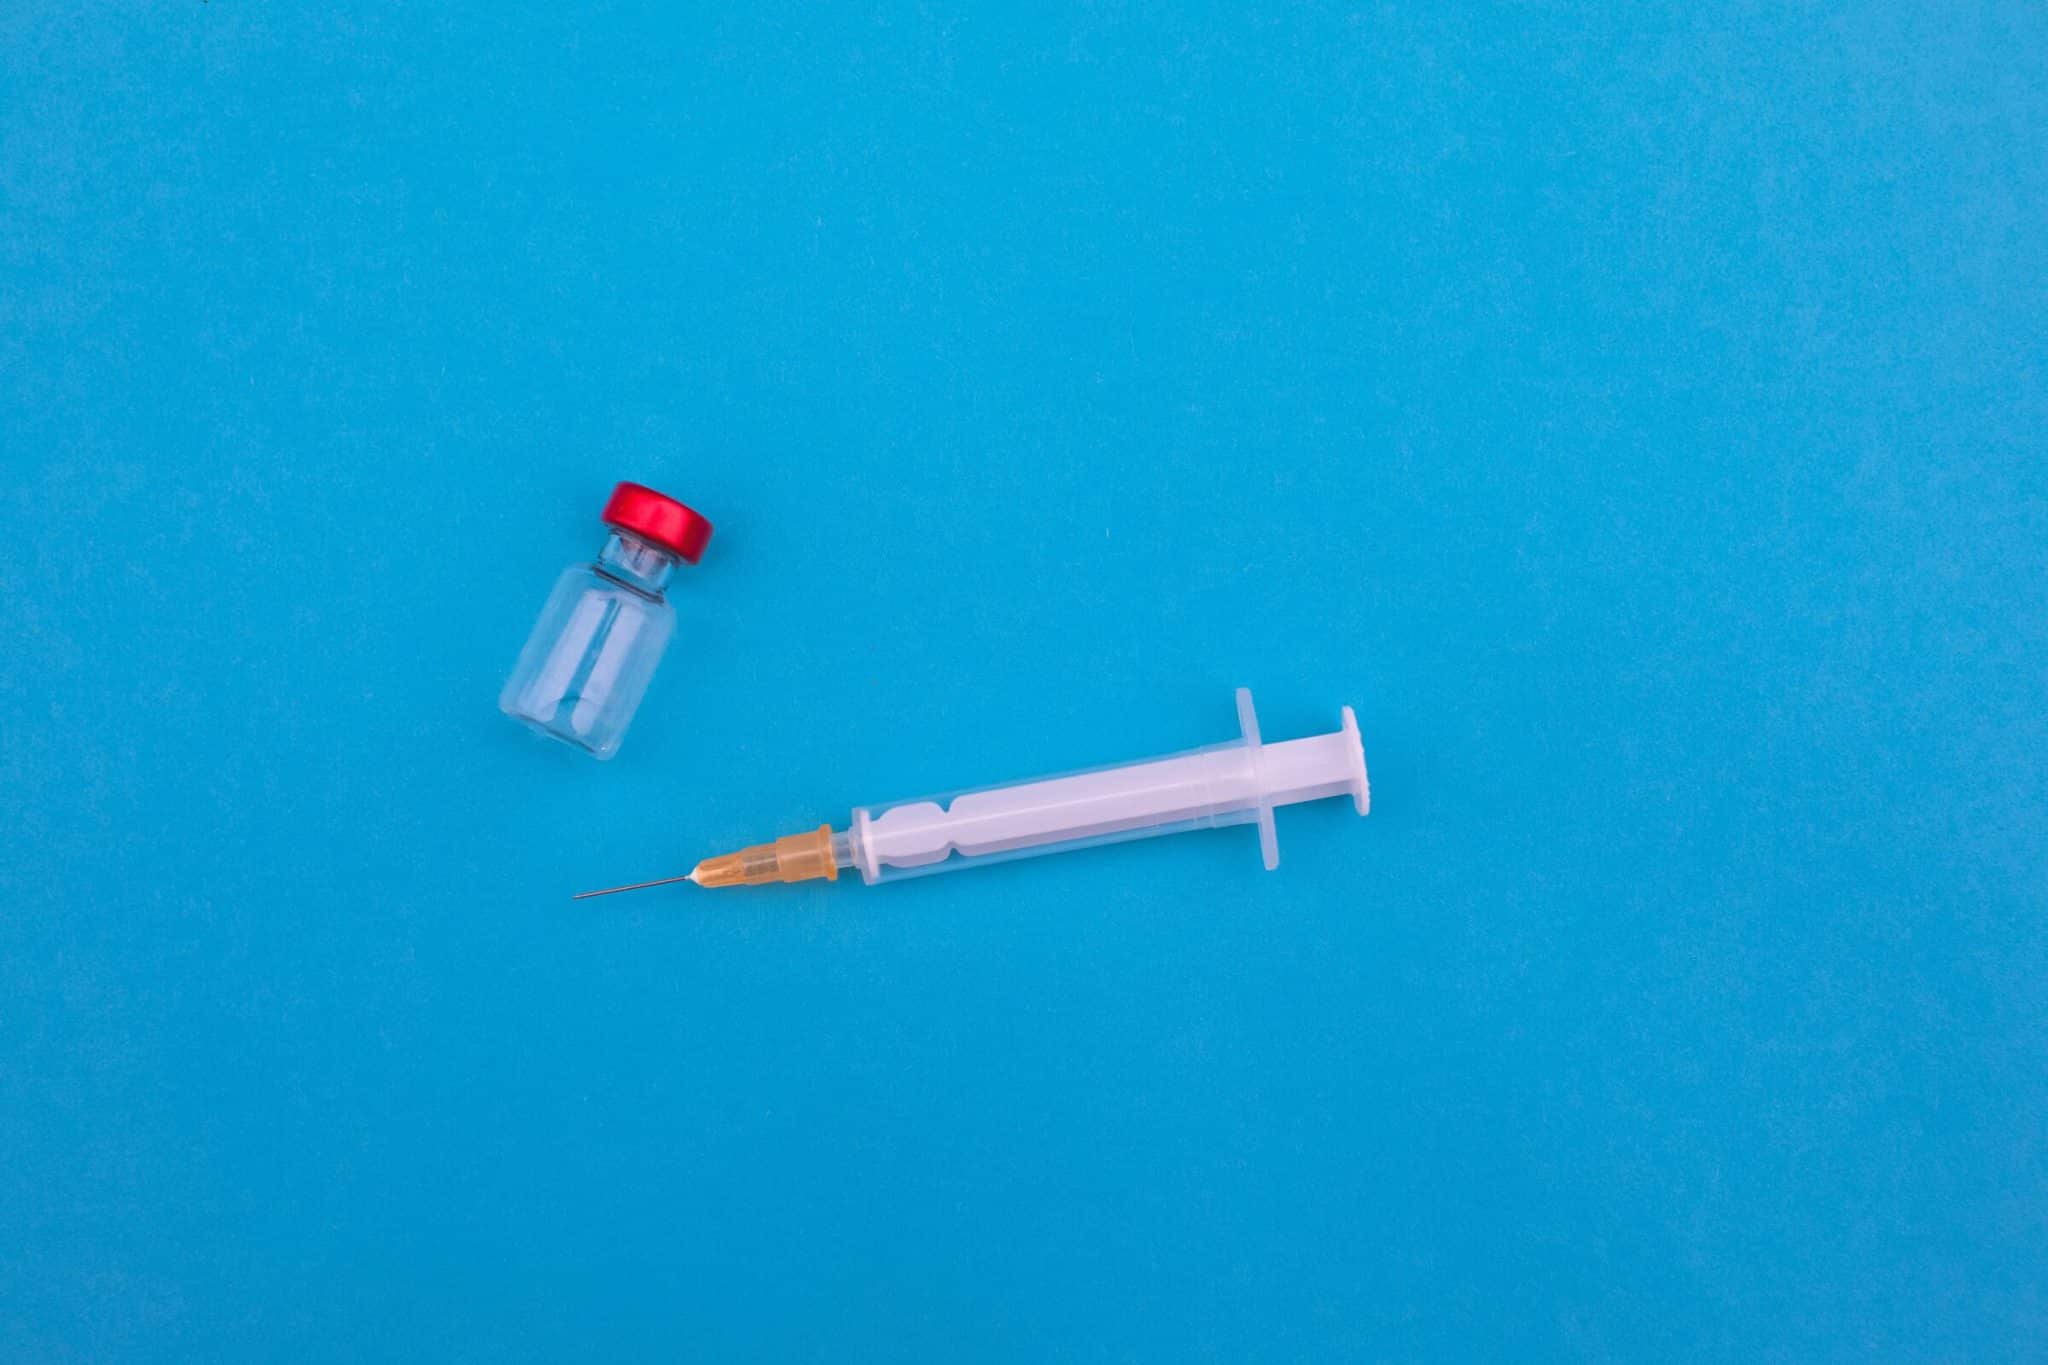 A needle and dose of vaccine